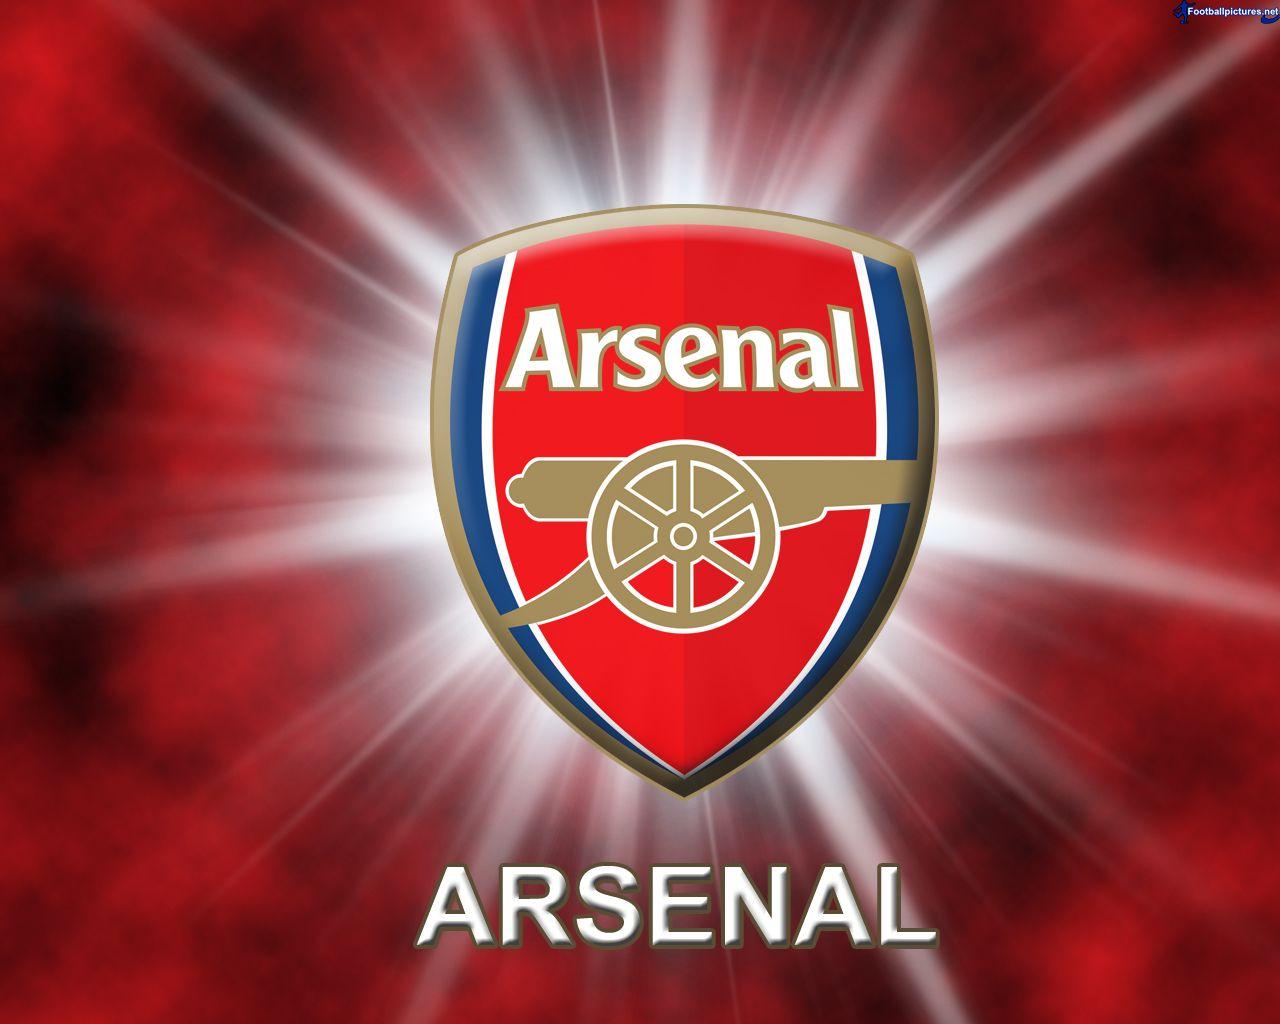 arsenal 2012 1280x1024 wallpaper, Football Picture and Photo